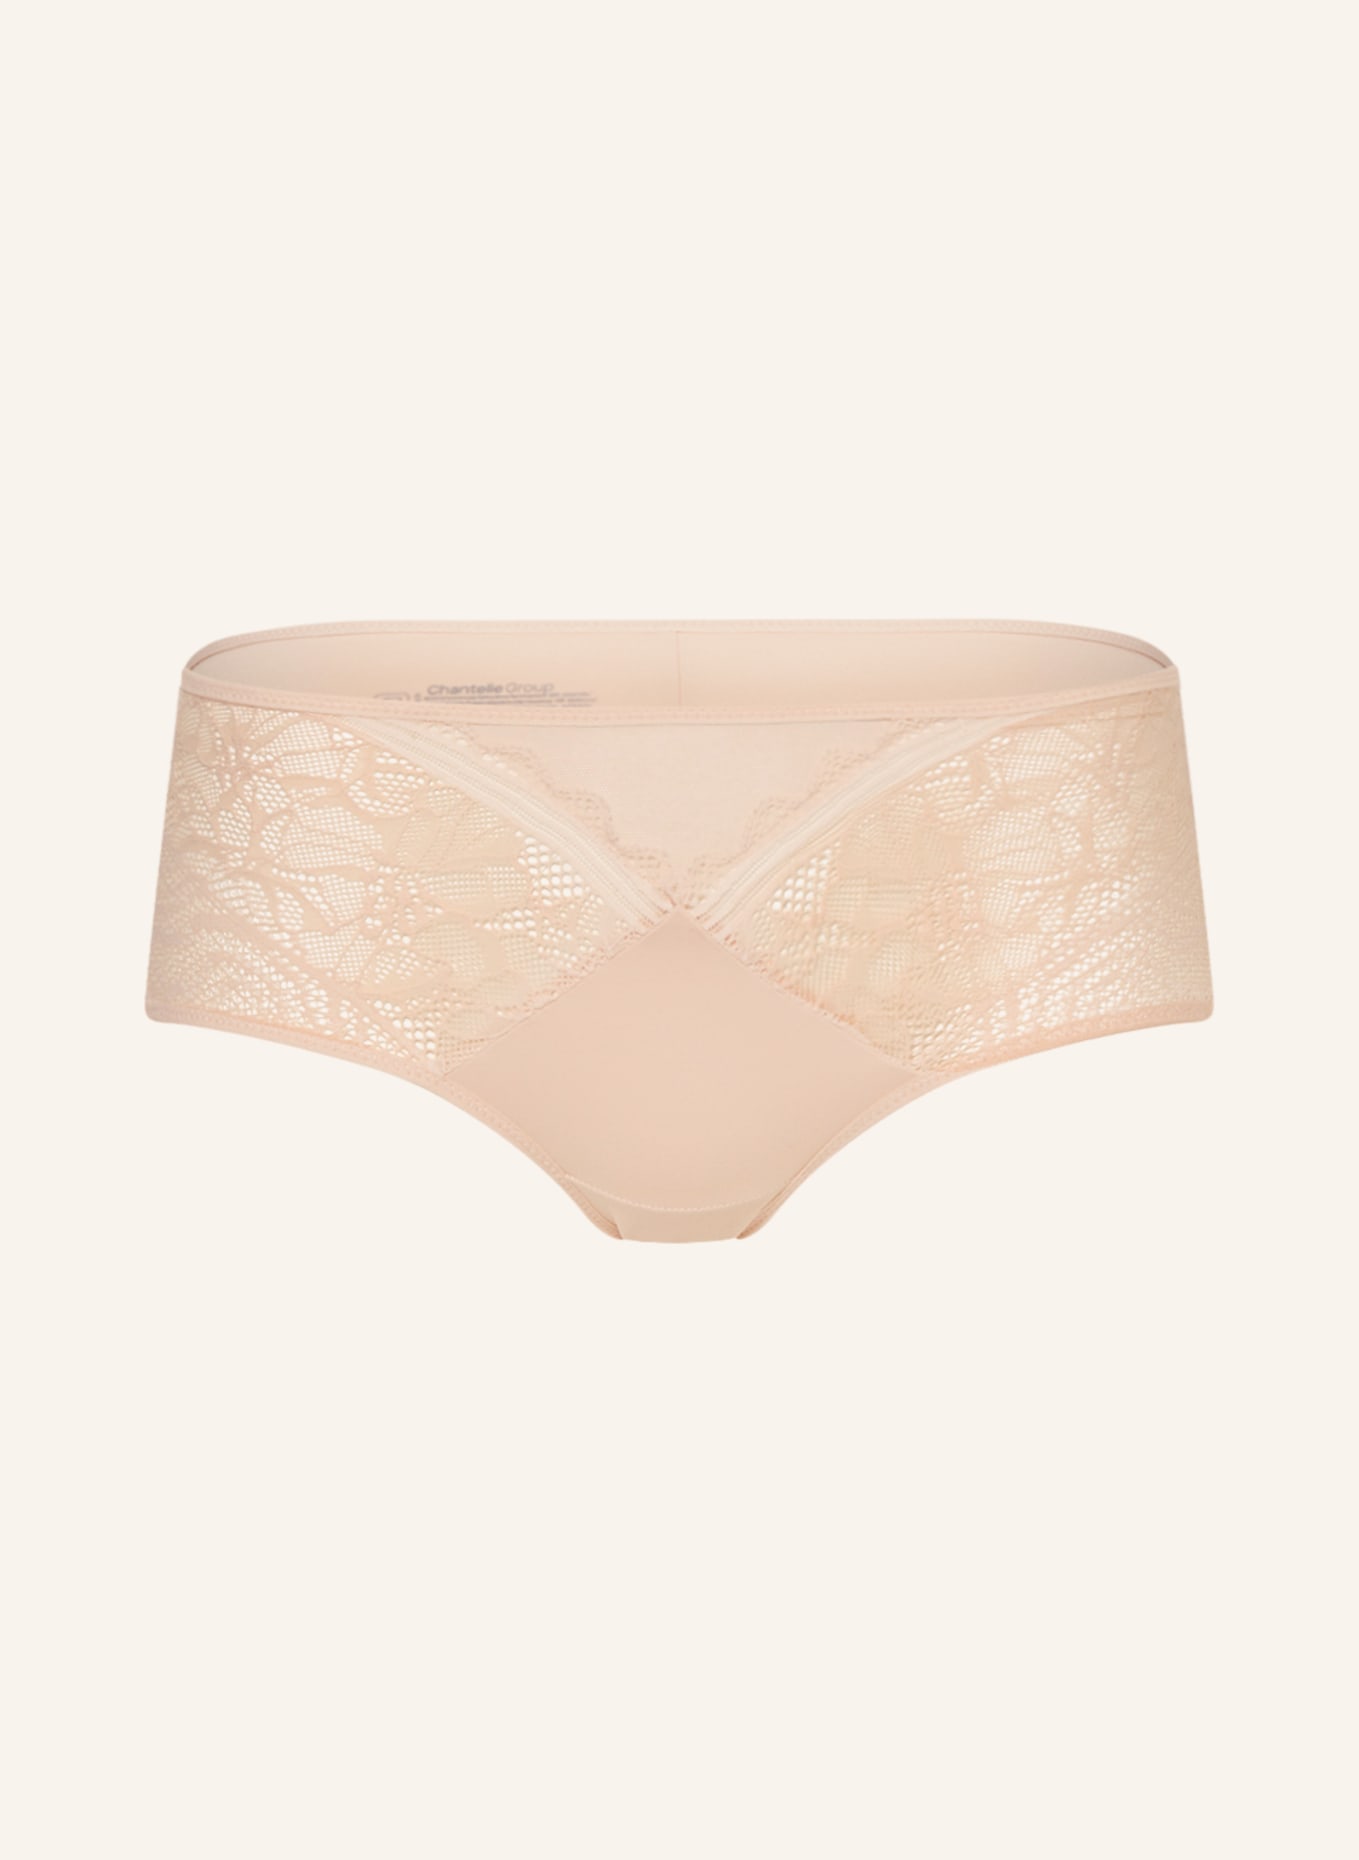 CHANTELLE Panty FLORAL TOUCH, Farbe: NUDE (Bild 1)